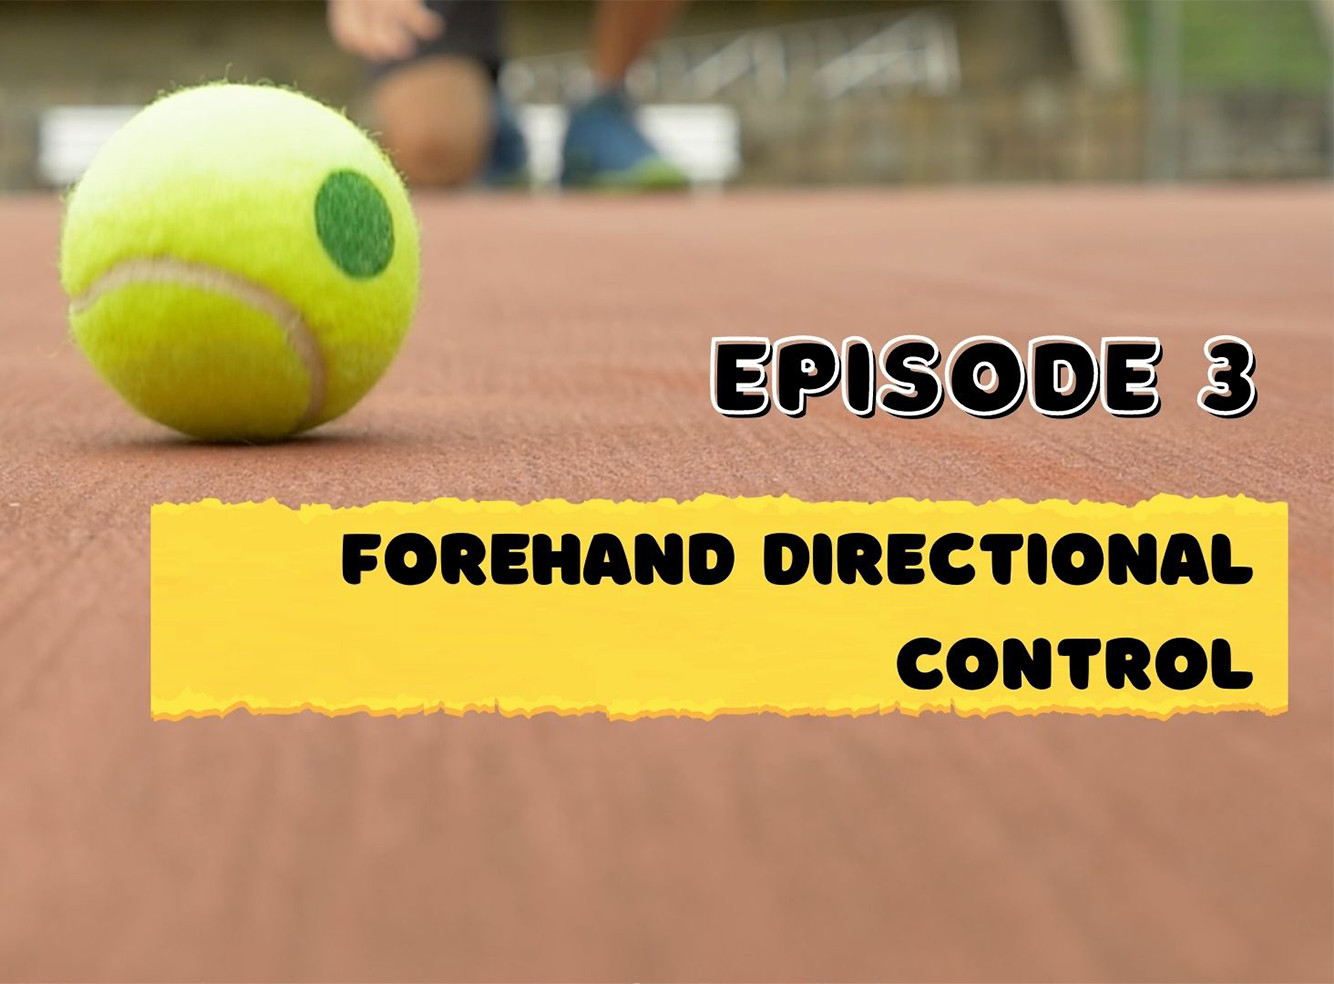 Ep 3: Forehand directional control